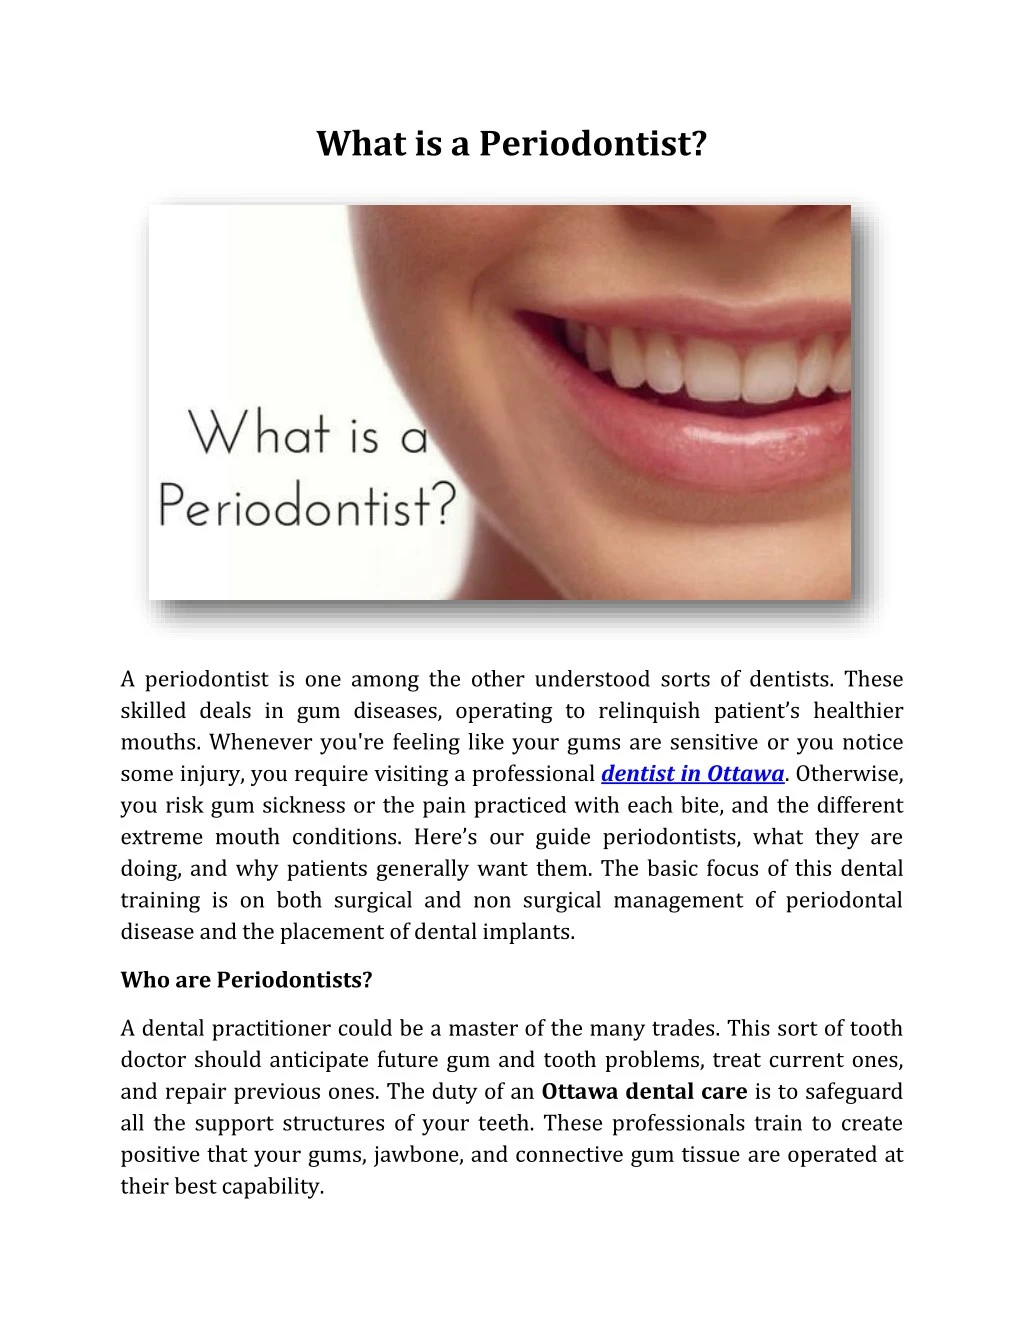 what is a periodontist